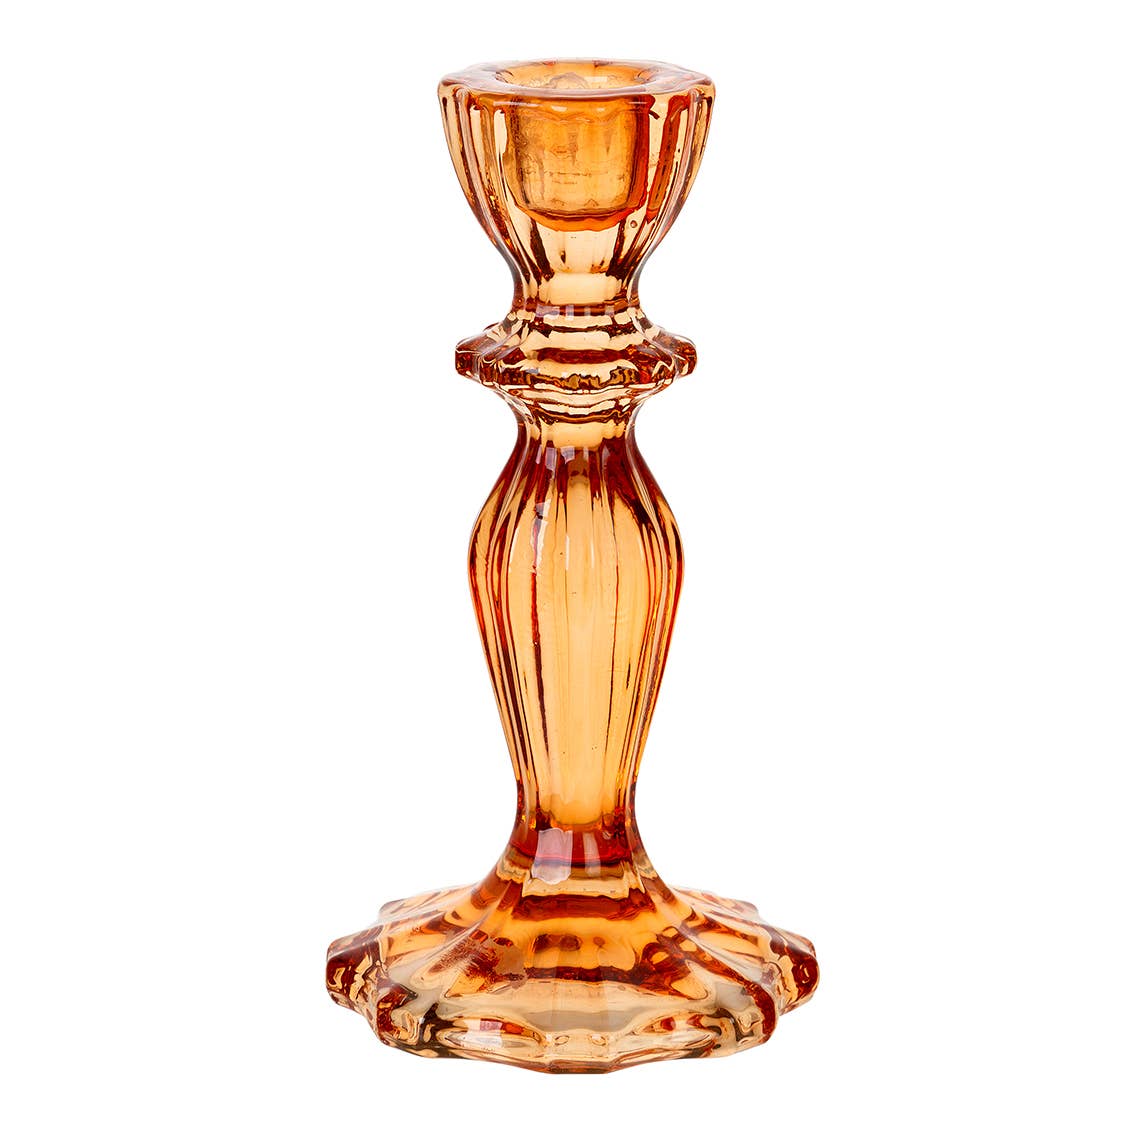 Orange Glass Candlestick Holder - Gifts for Her